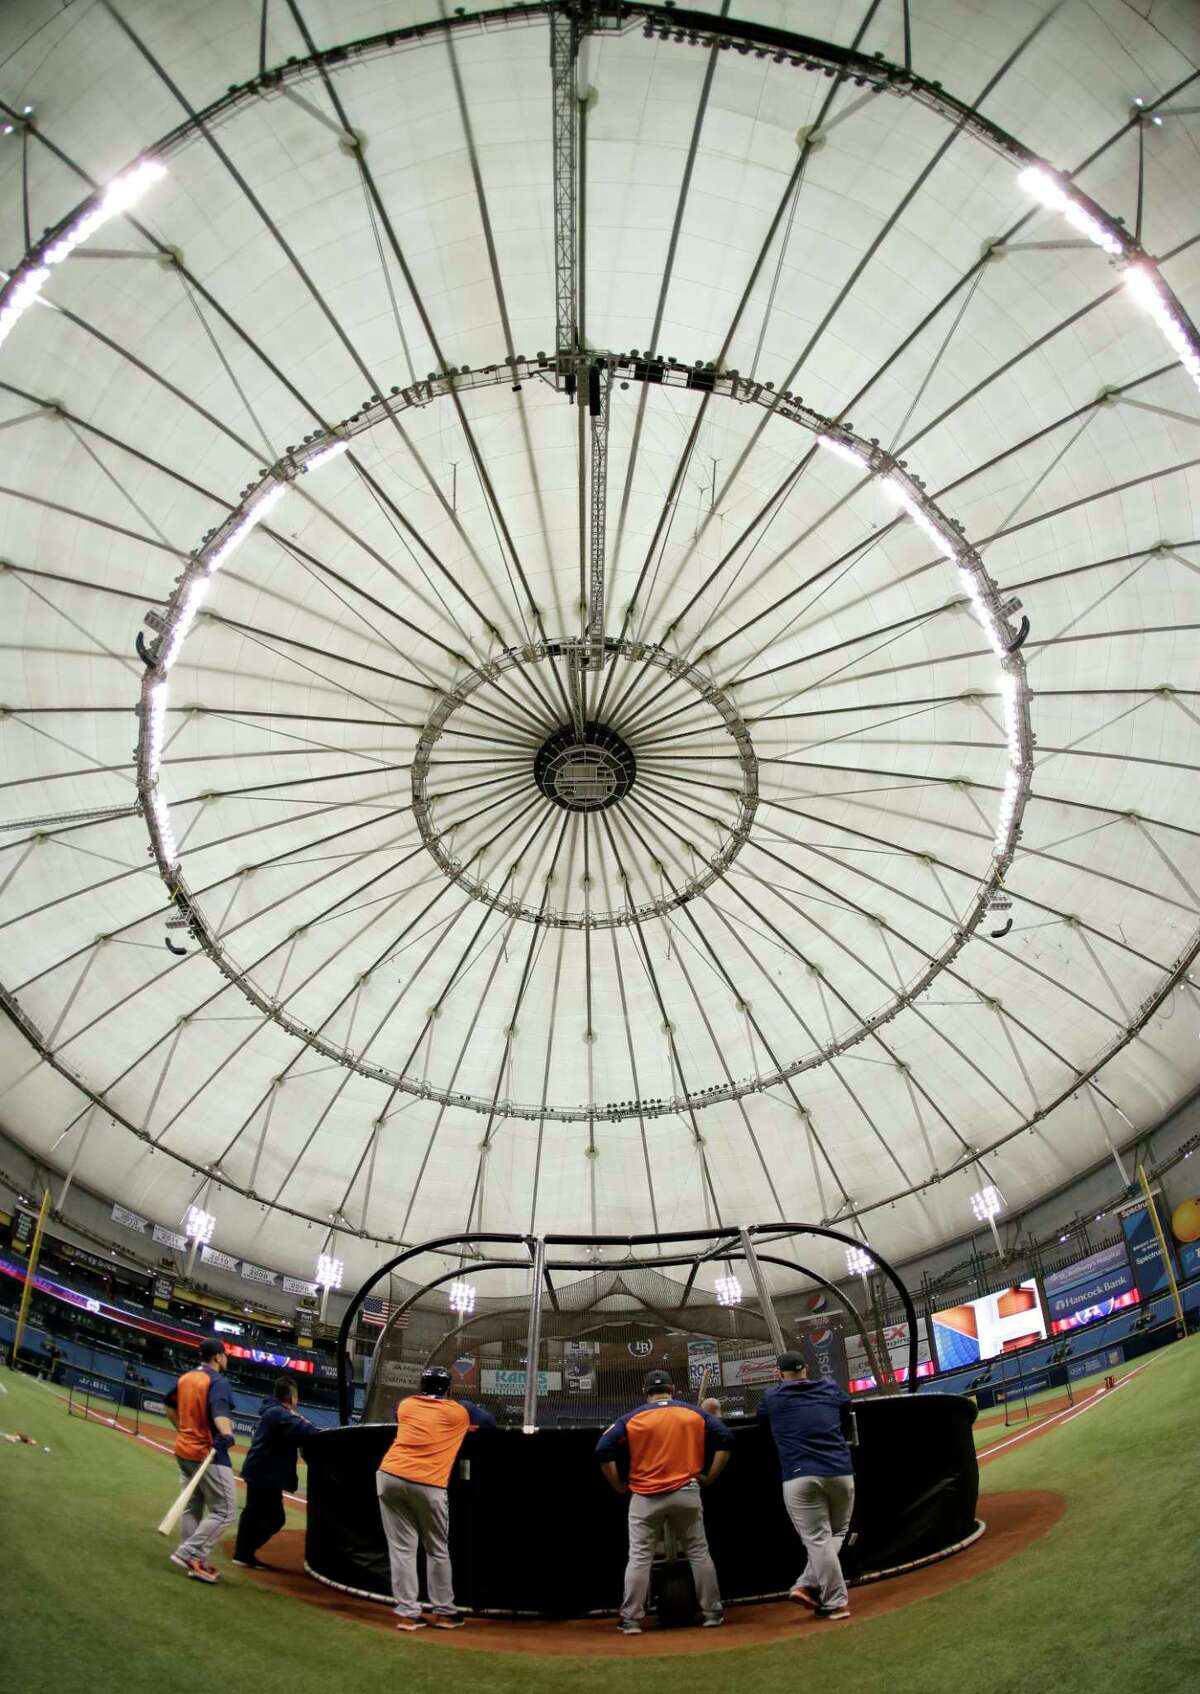 Houston Astros coaches watch batting practice before a baseball game against the Texas Rangers Tuesday, Aug. 29, 2017, in St. Petersburg, Fla. The Astros moved their three game home series against the Rangers to St. Petersburg because of unsafe conditions from Hurricane Harvey. (AP Photo/Chris O'Meara)